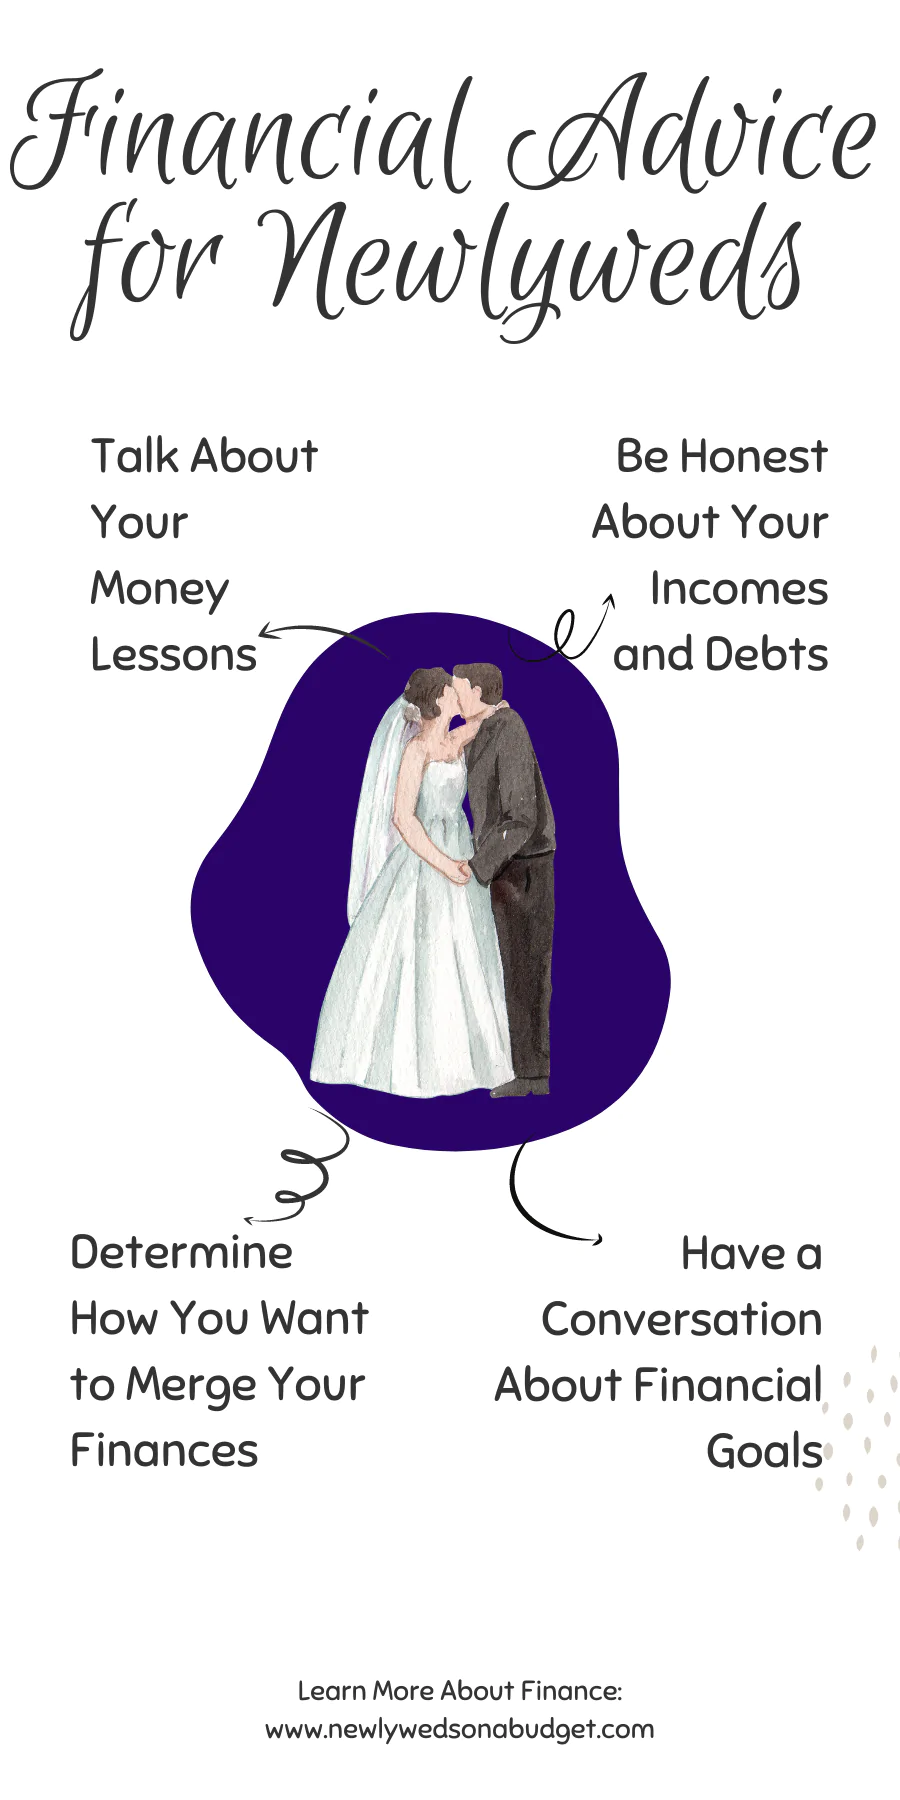 Tips for newlyweds